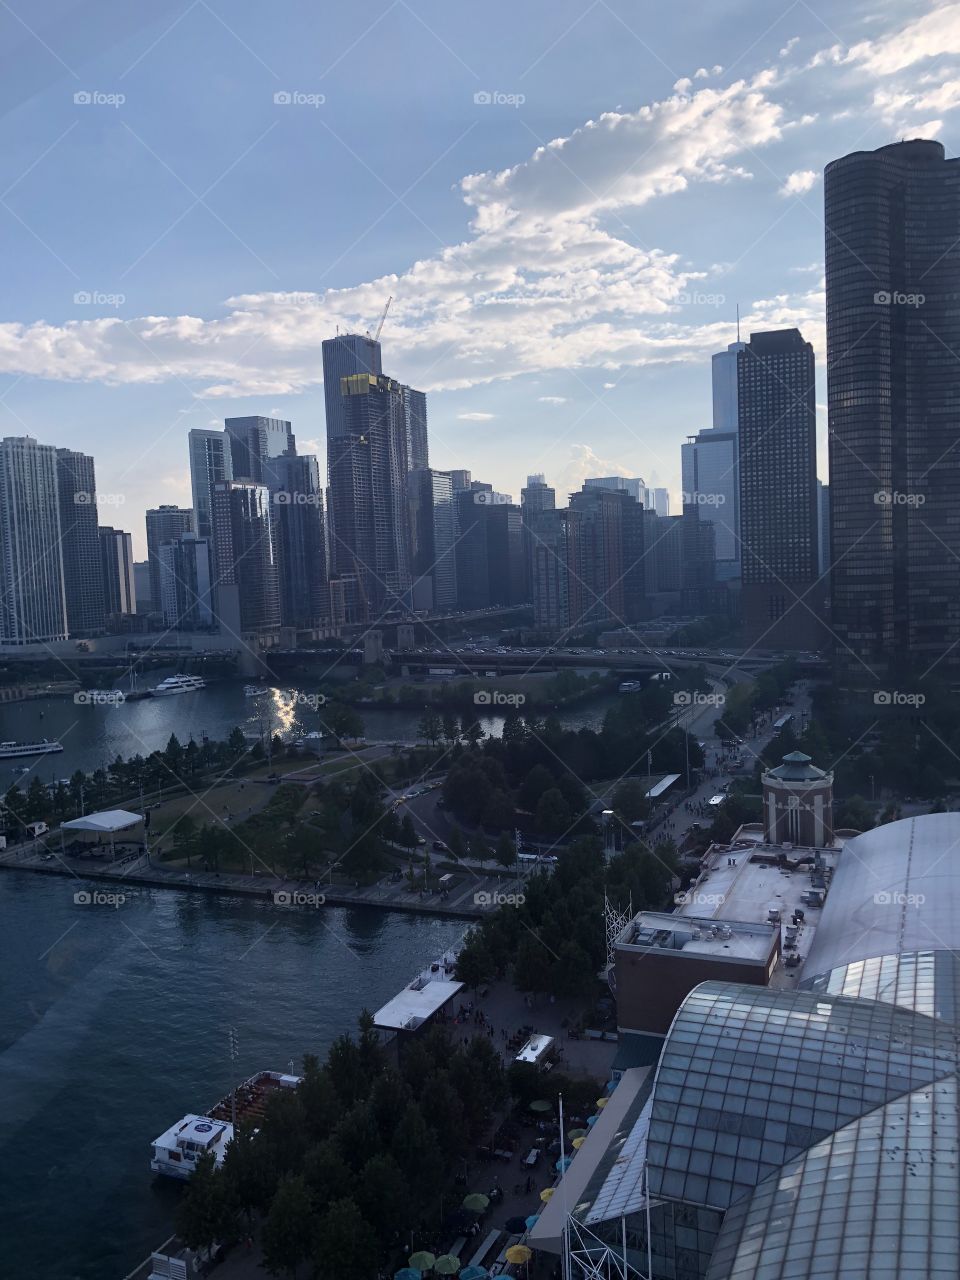 A beautiful view of Chicago from the Navy Pier Ferris Wheel on a lovely summer day! 